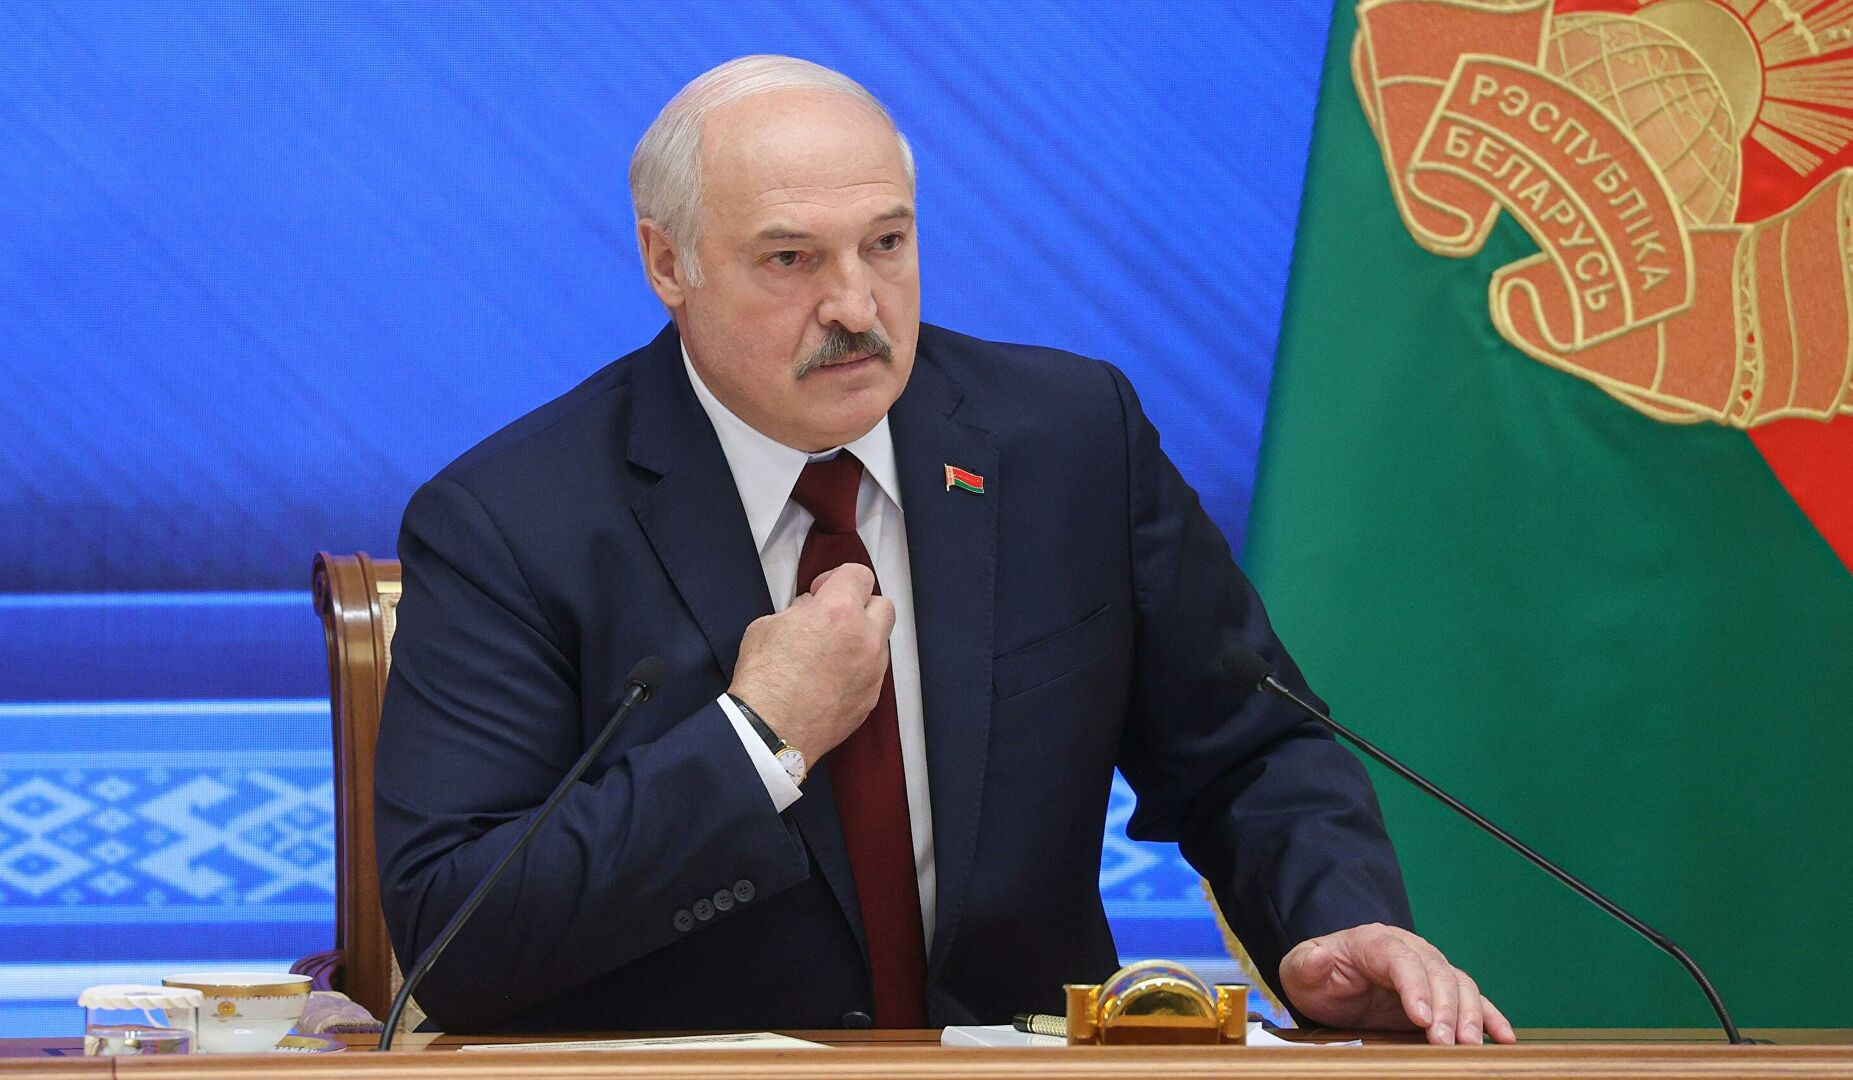 Belarus does not want to fight but is preparing for war: Lukashenko